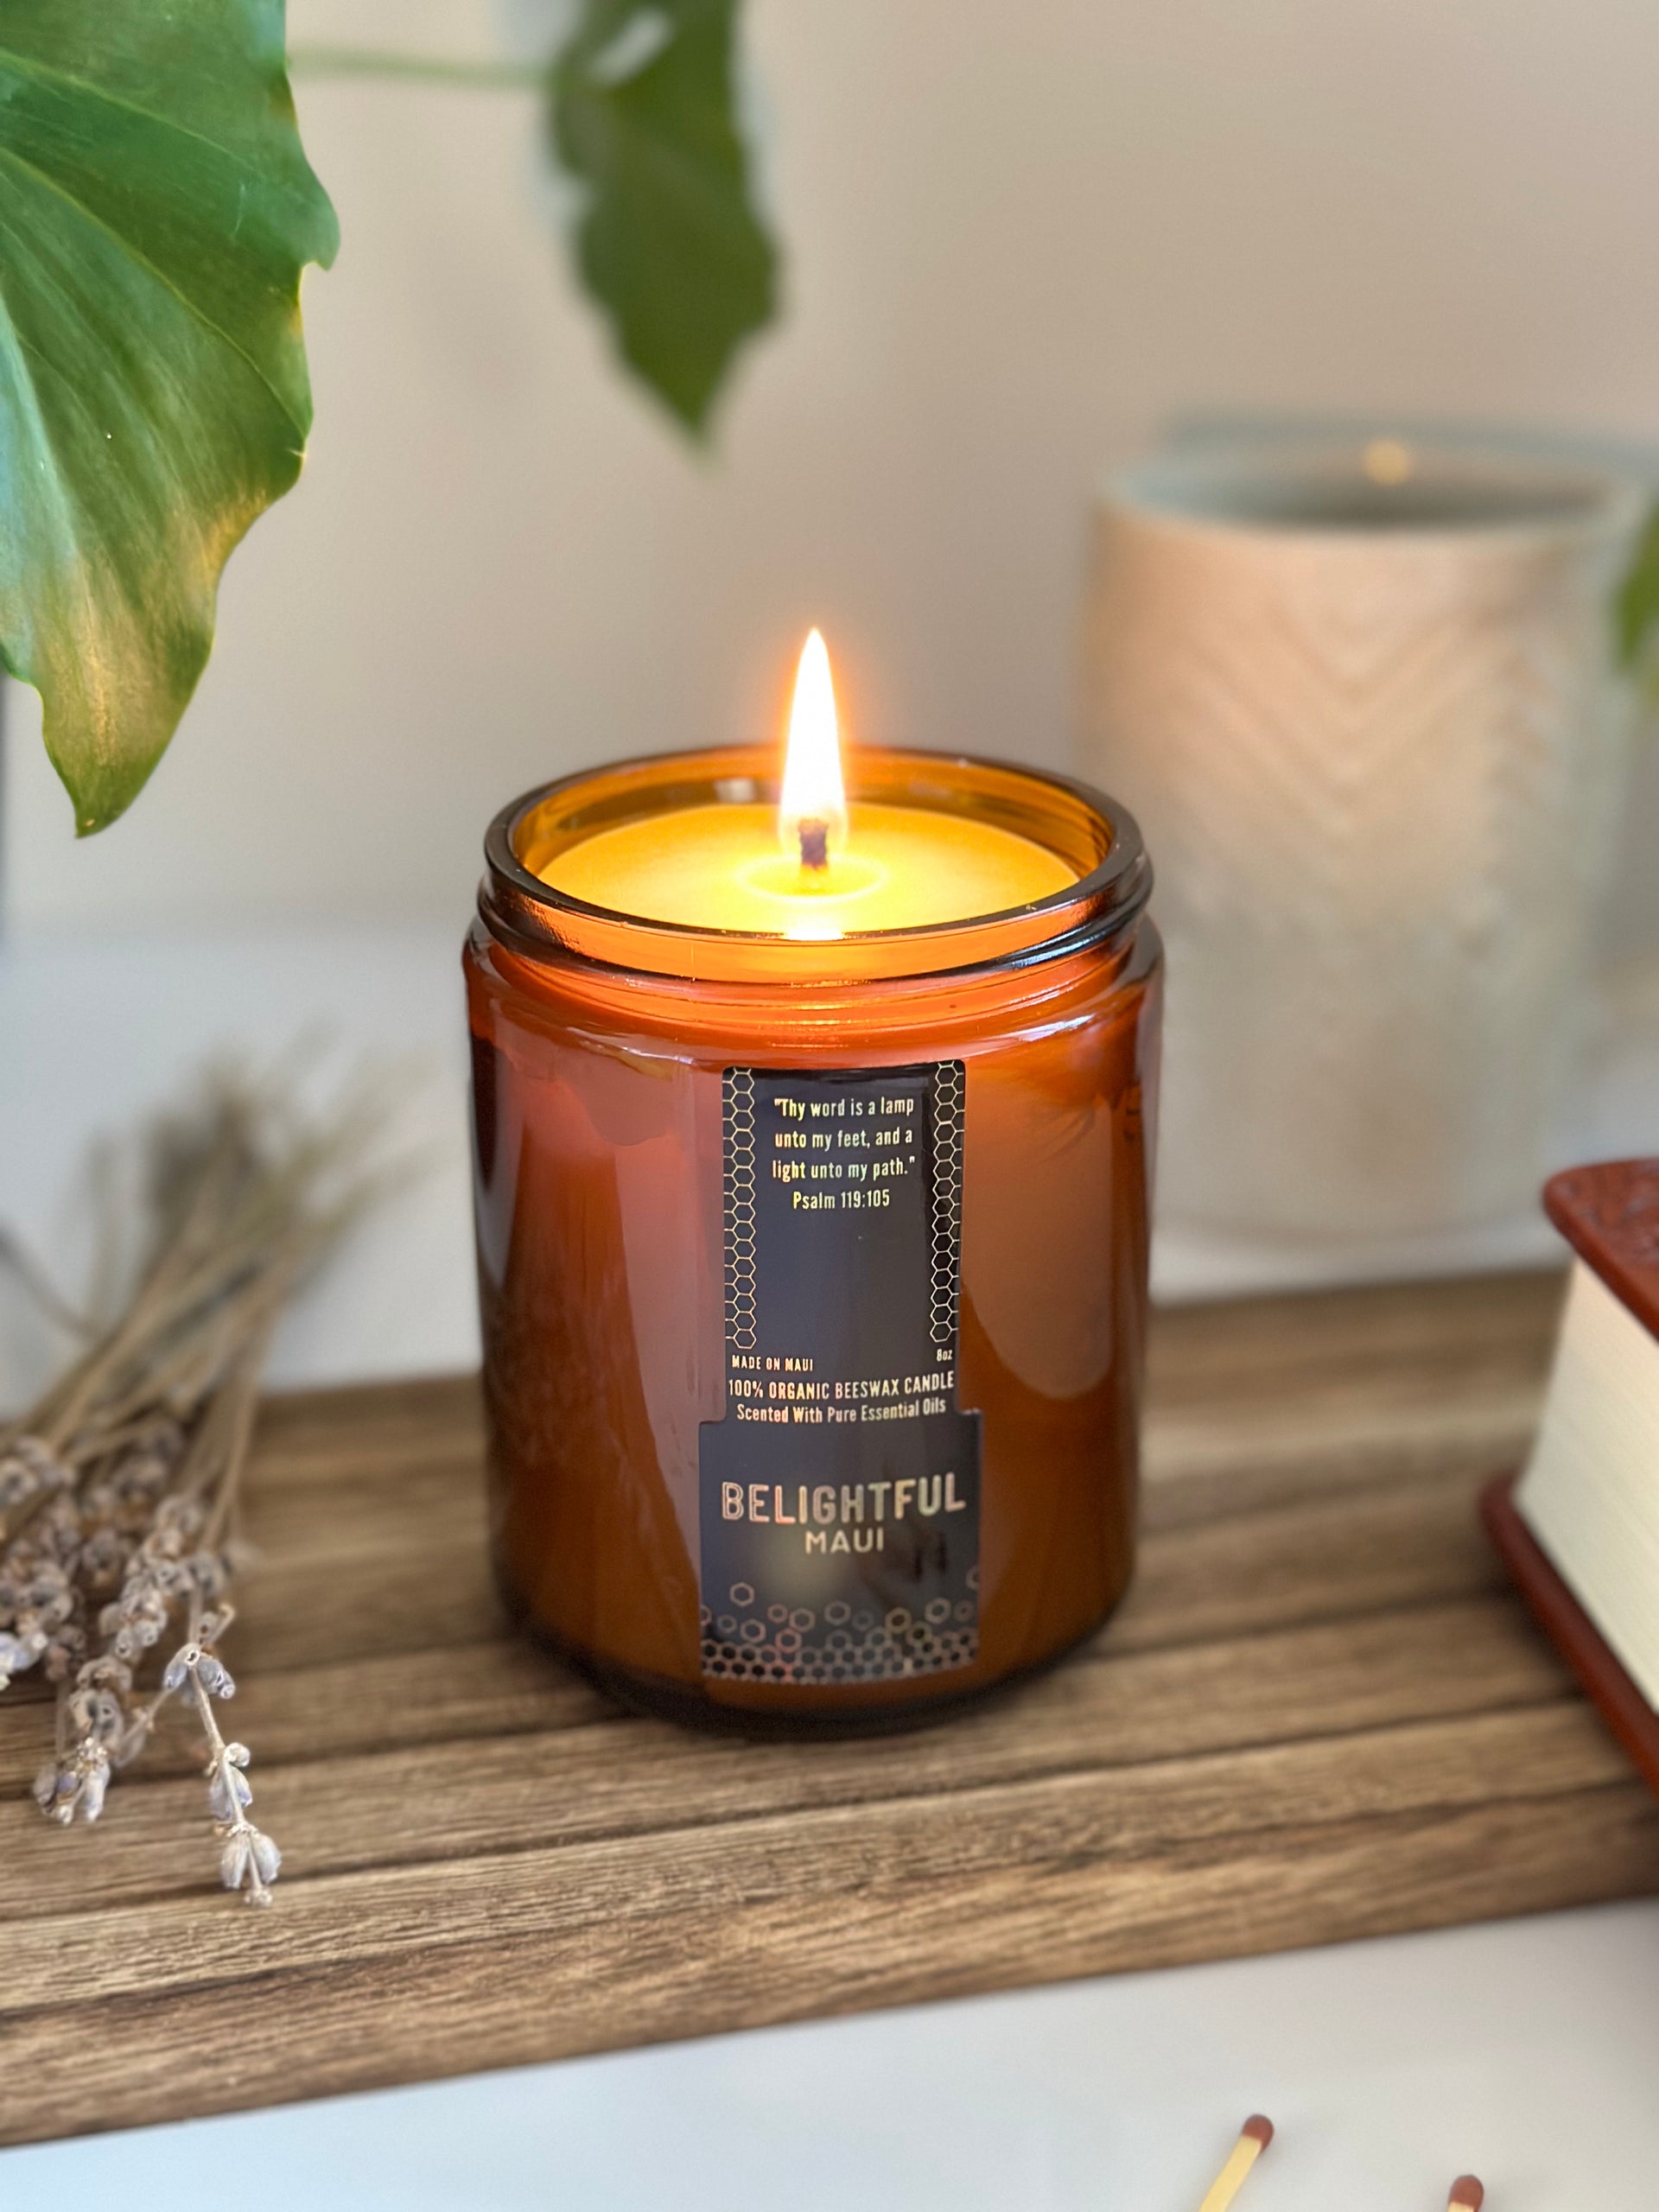 Tranquility Pure Beeswax Candle Jar – 90+ Hours Long Burning Classically  Designed Non-Toxic Scented Candles for Home Decor and Aromatherapy to  Stress